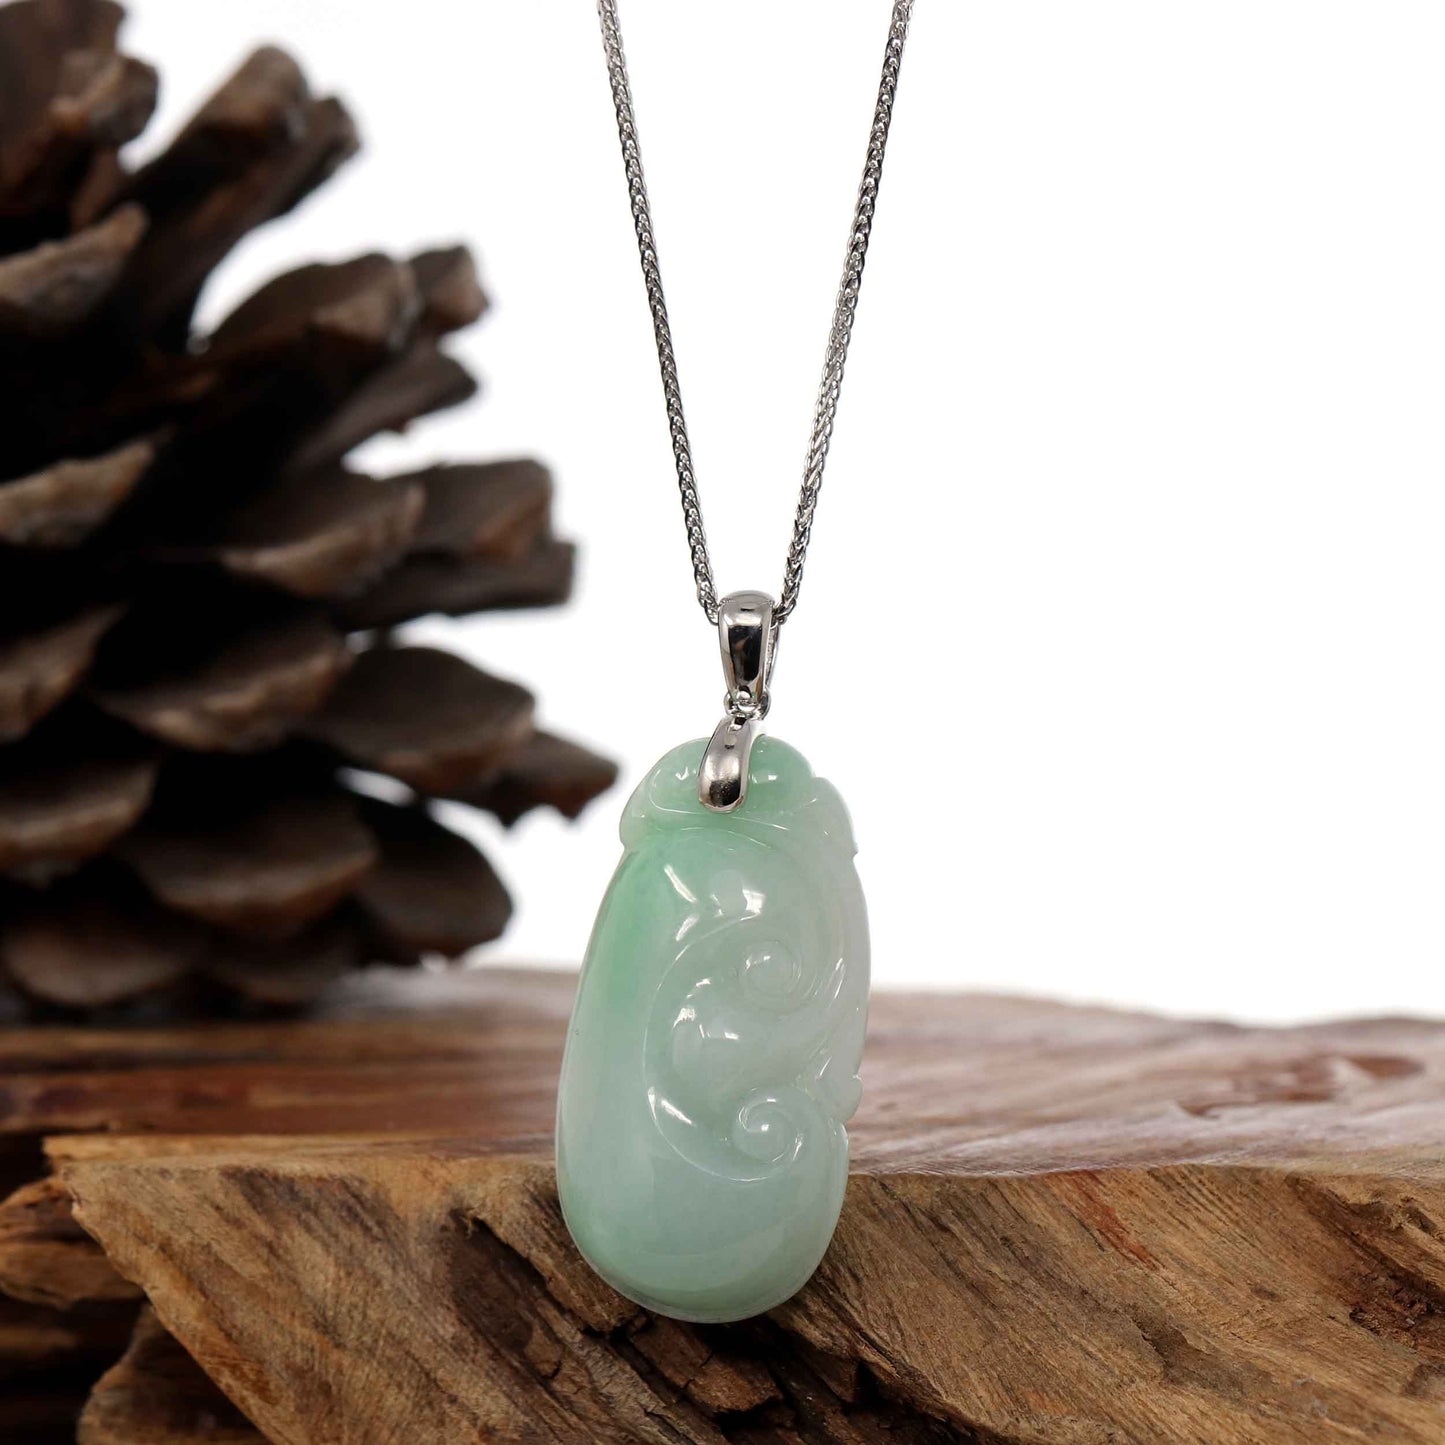 RealJade Co.® Jade Guanyin Pendant Necklace Natural Light Green Jadeite Jade Ru Yi Pendant Necklace With Sterling Silver Bail